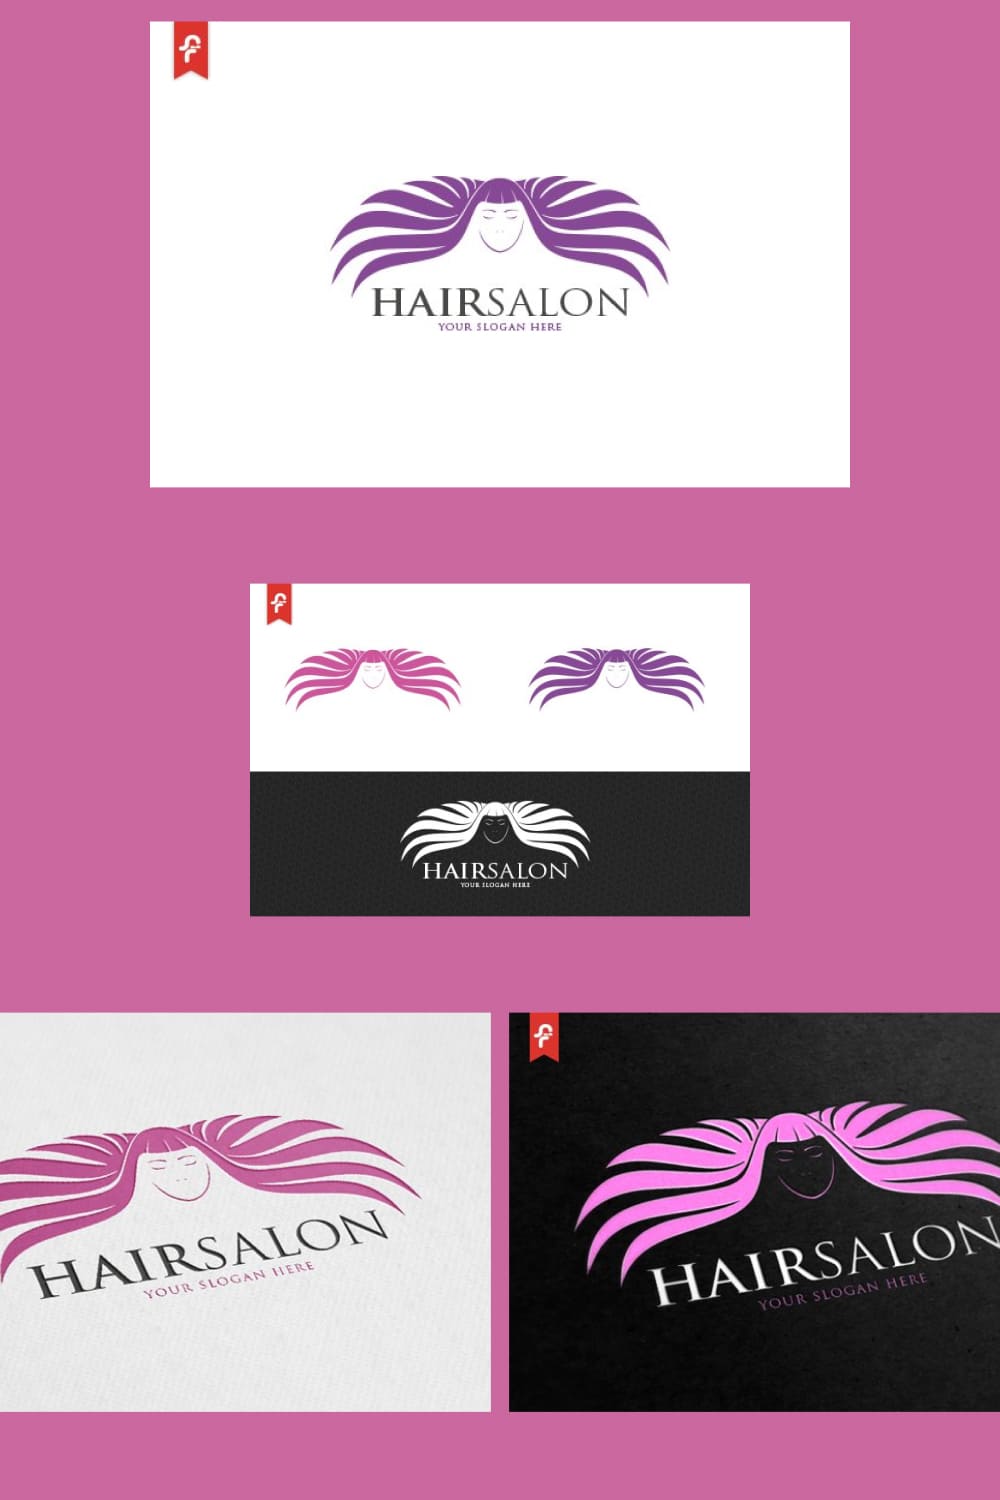 Logo designed with 4 colors: pink, purple, white and black.